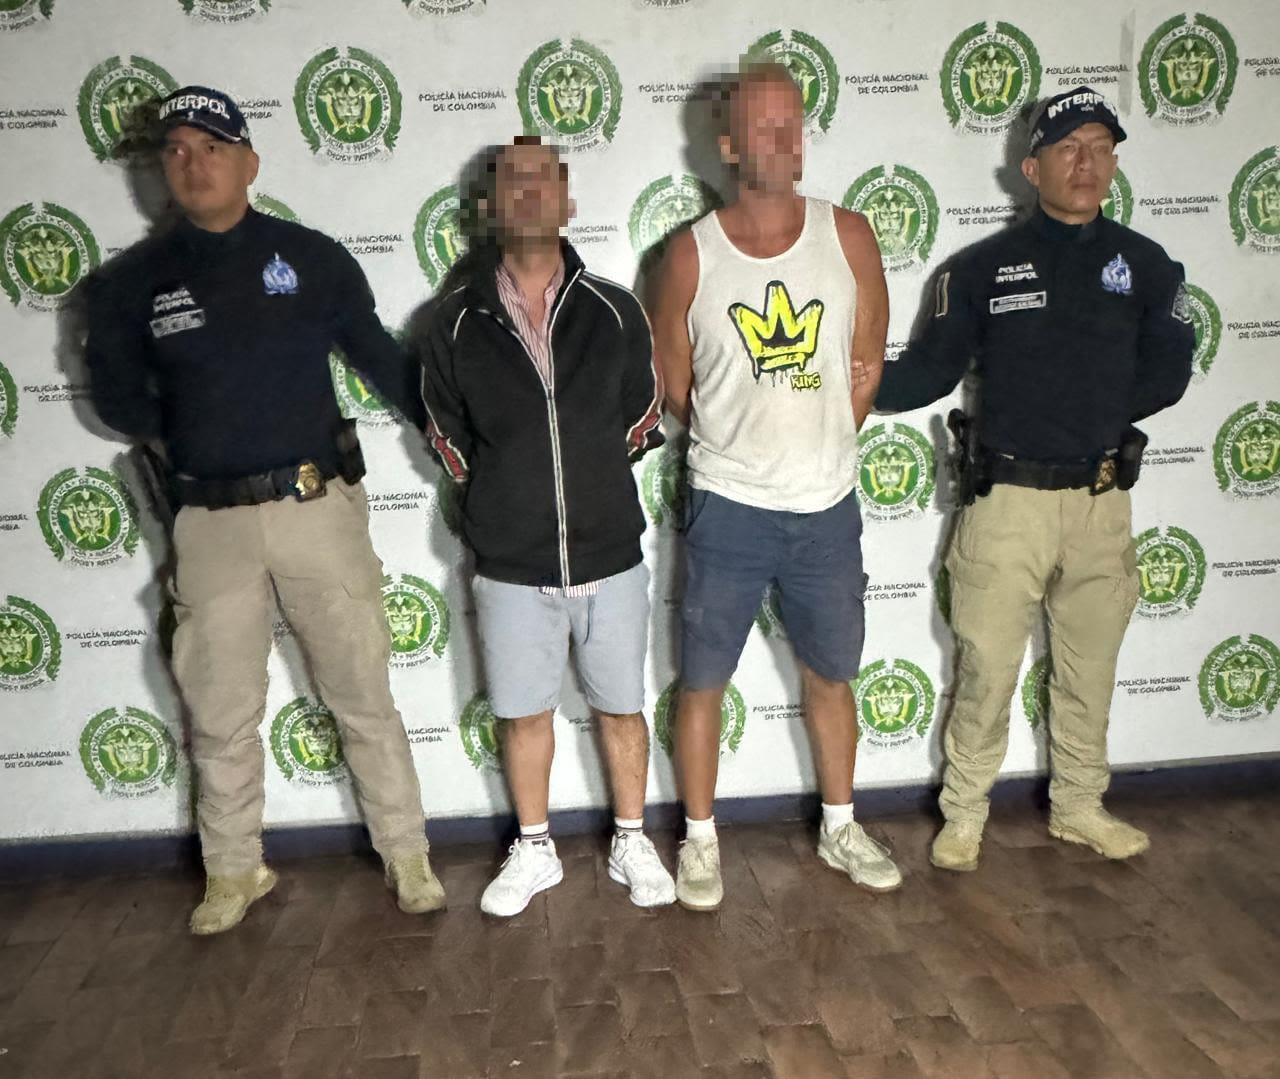 Accused cocaine trafficker dubbed "The Professor" captured in Colombia